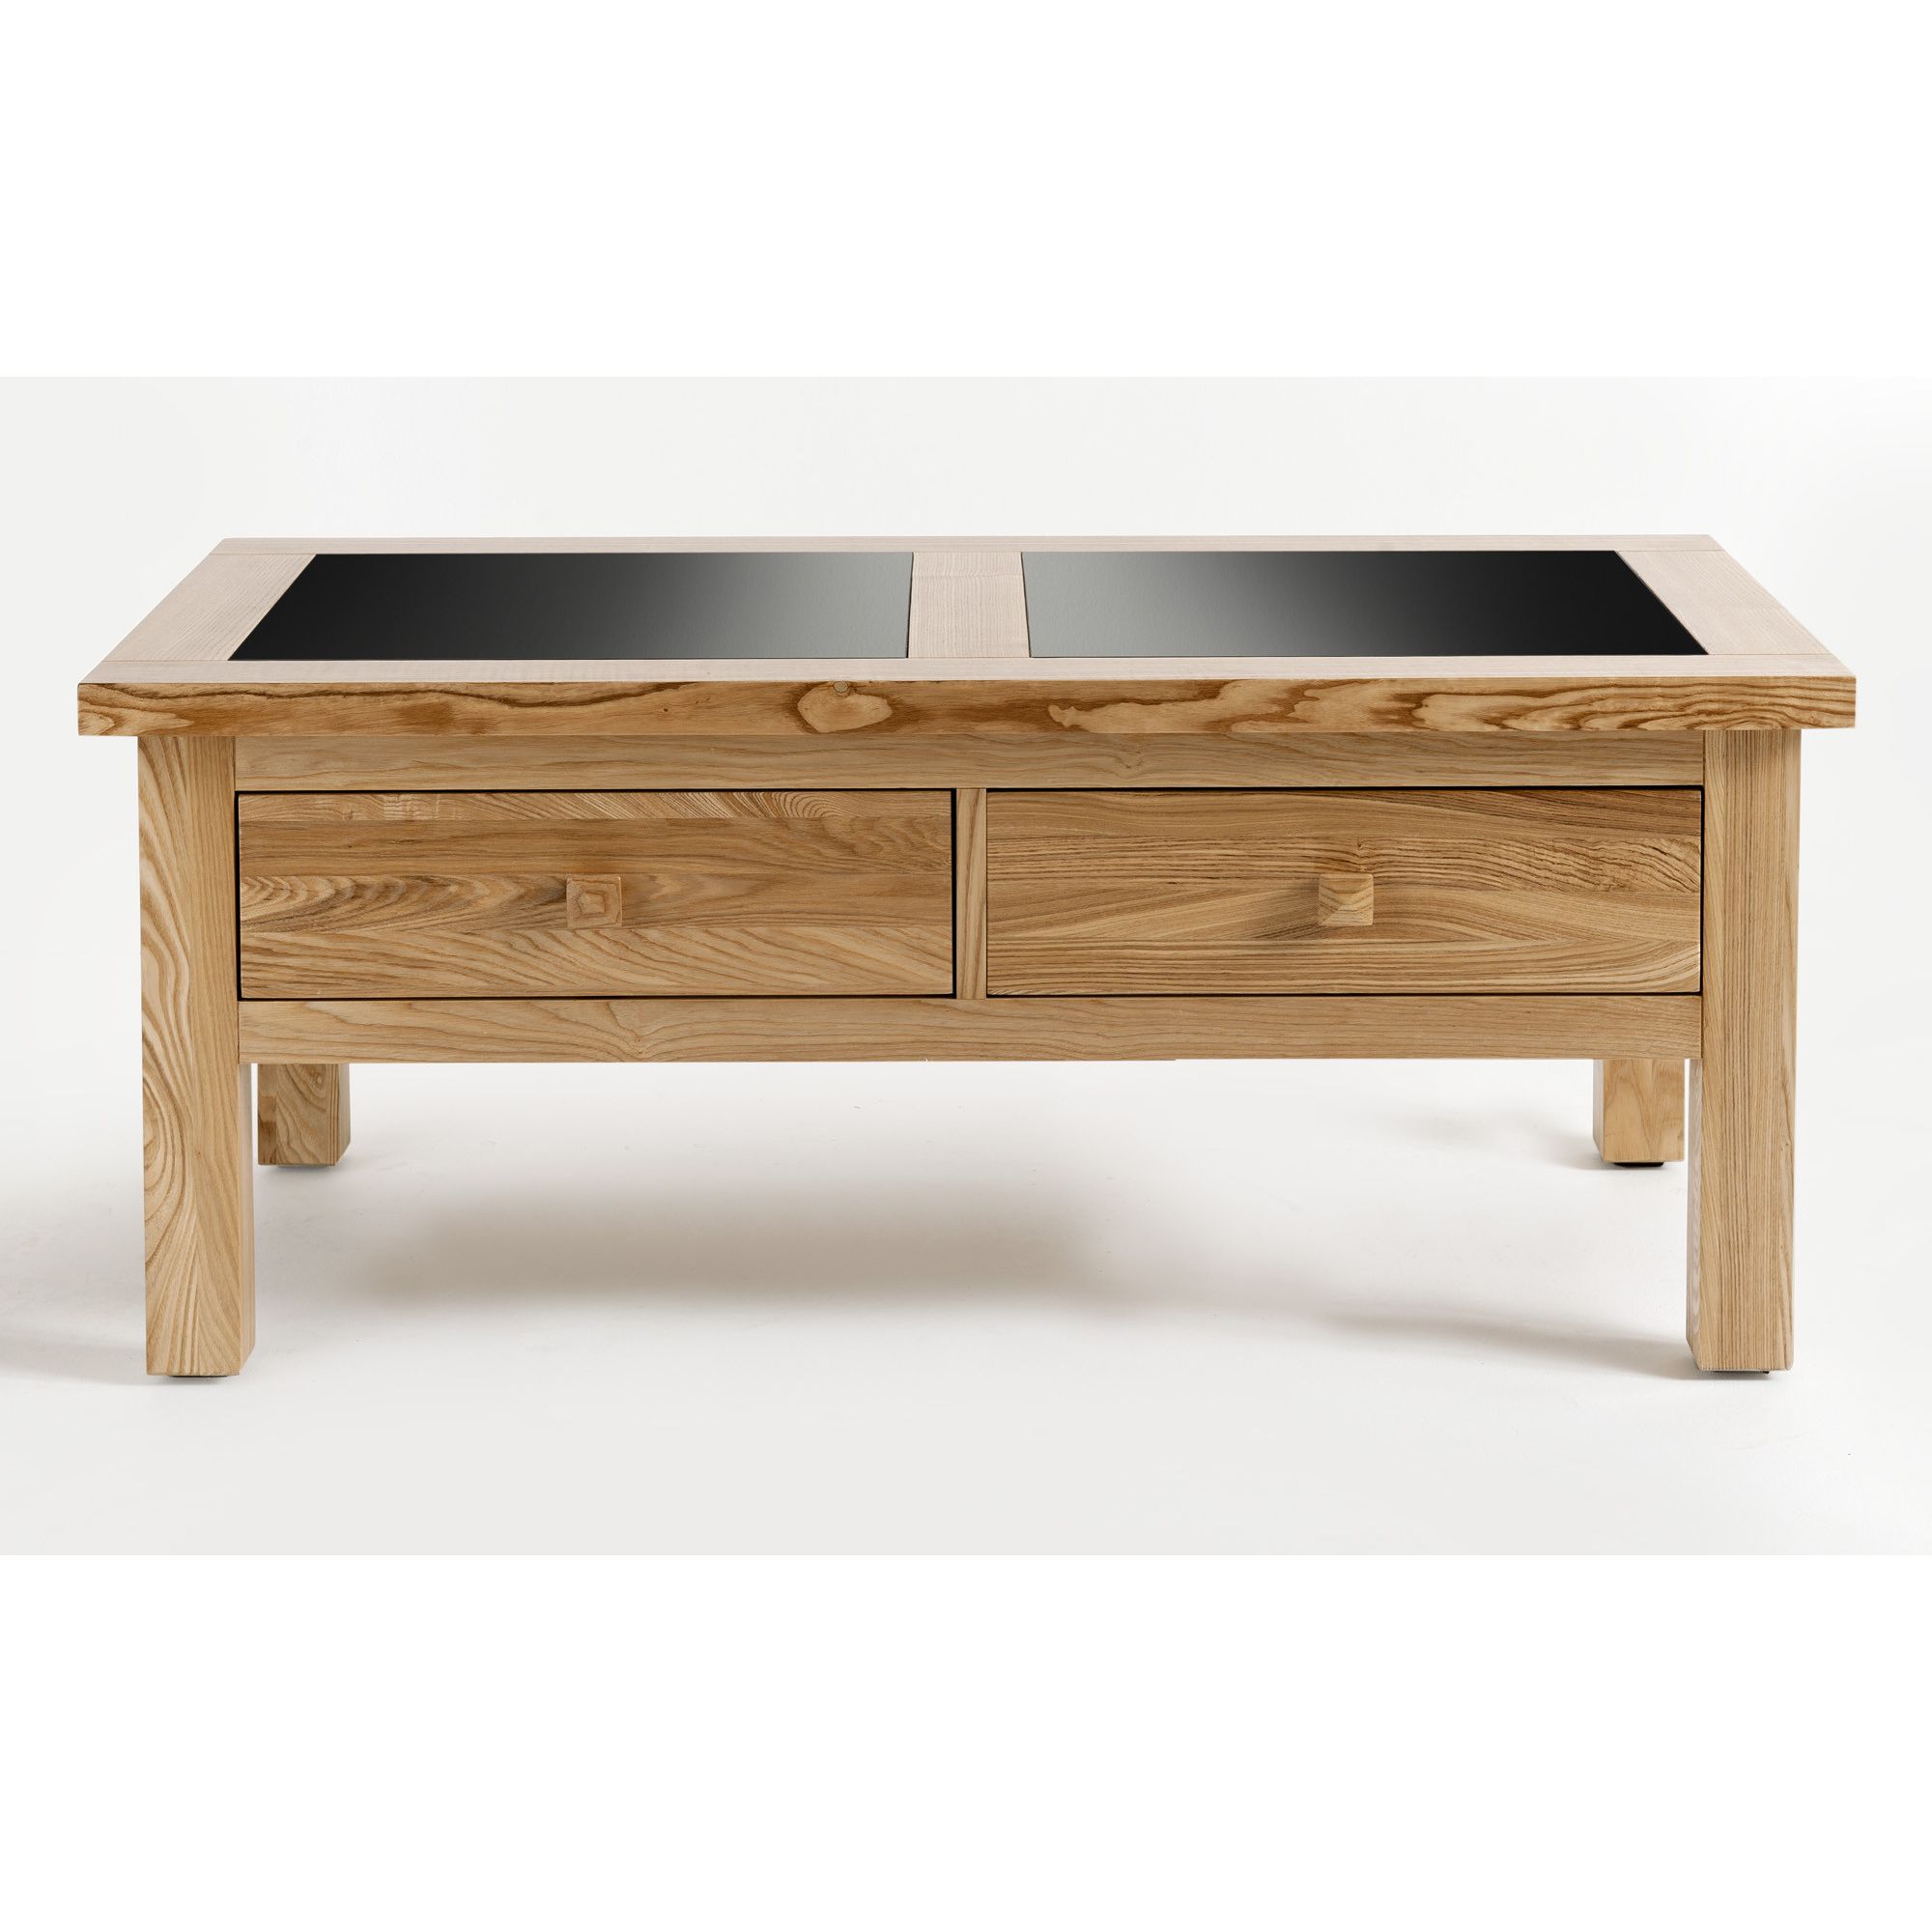 Originals Fusion Coffee Table at Tesco Direct